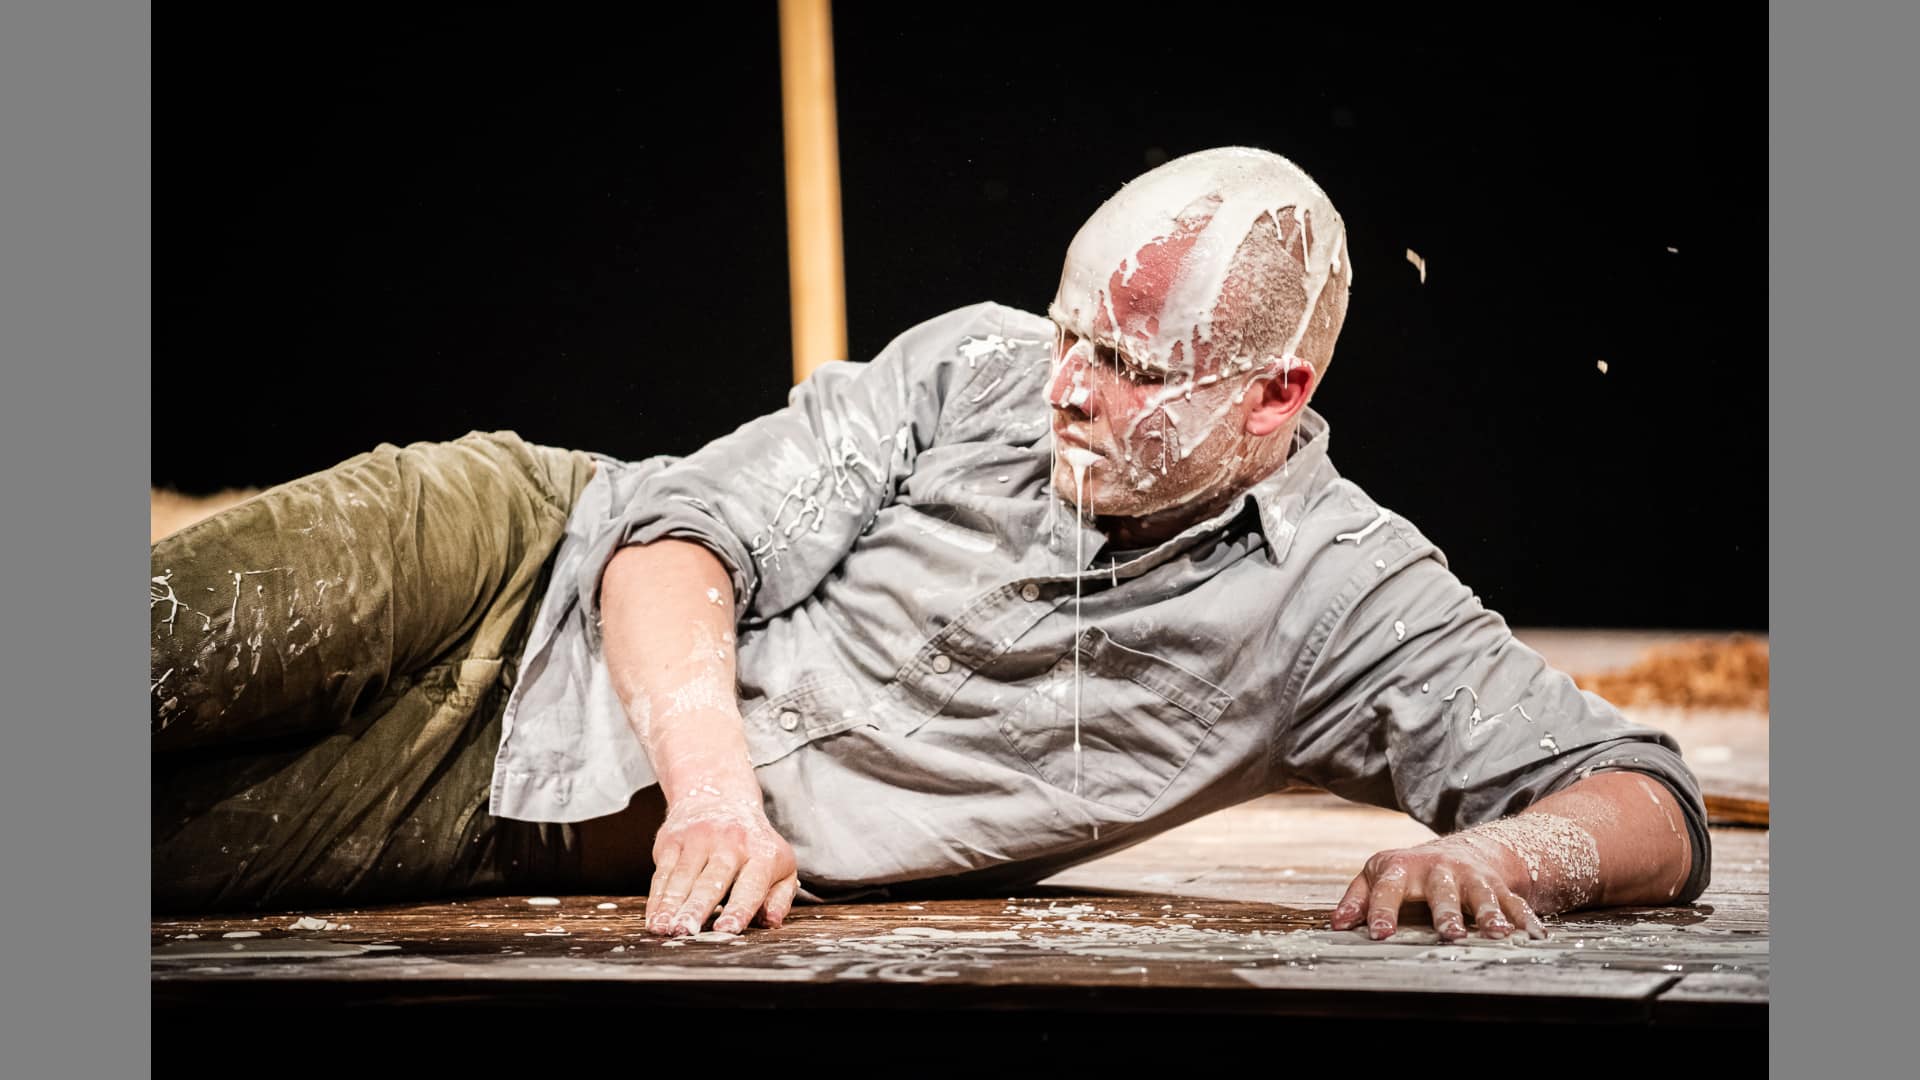 A performer reclines on stage, his face dripping with white glue